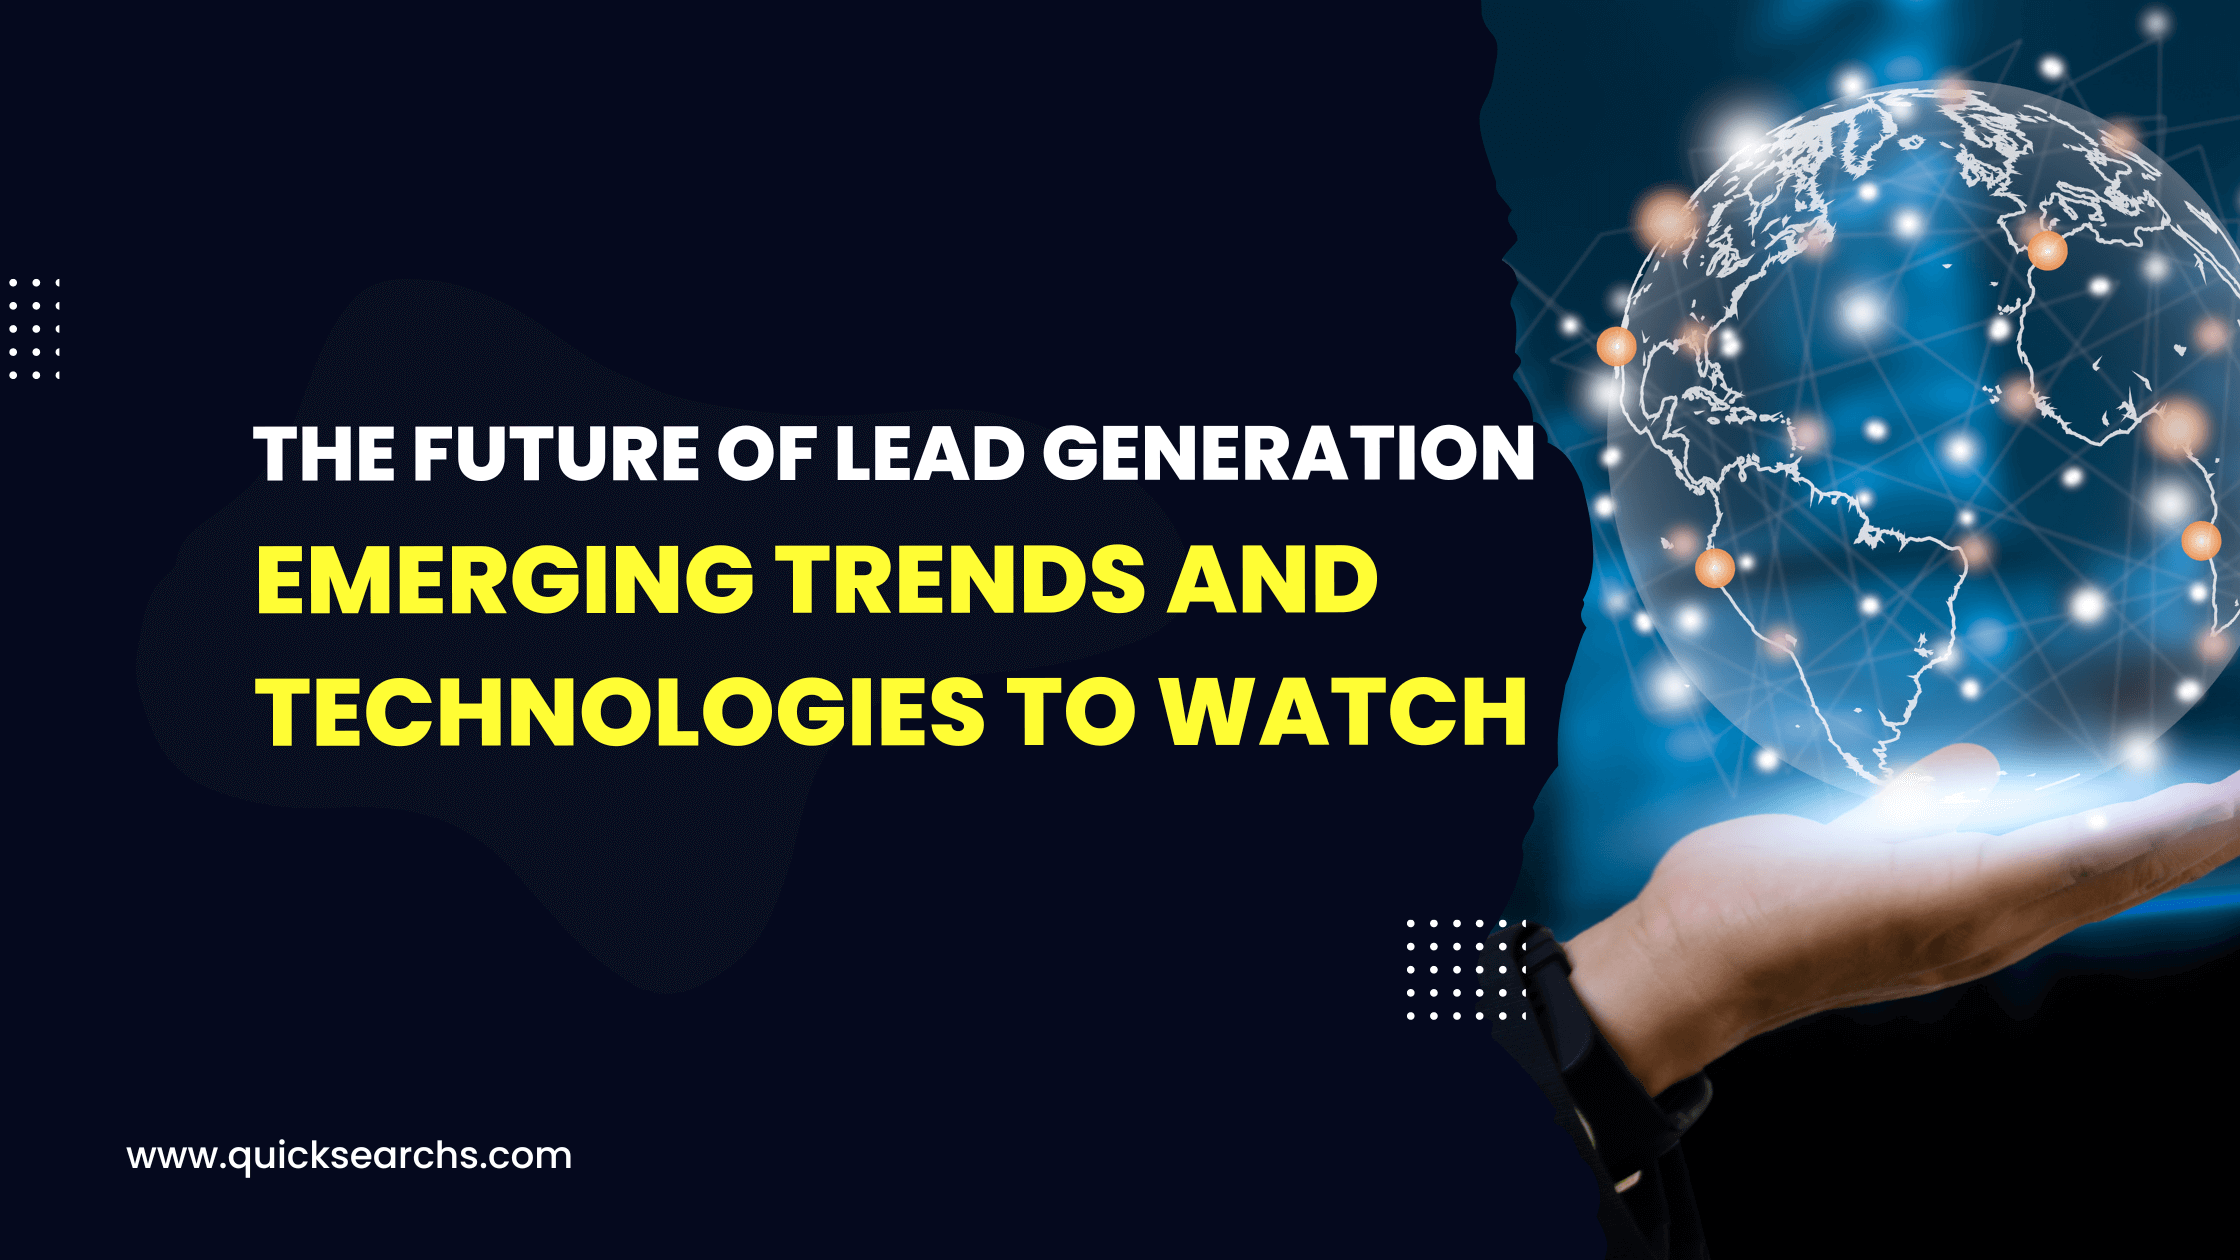 The Future of Lead Generation: Emerging Trends and Technologies to Watch